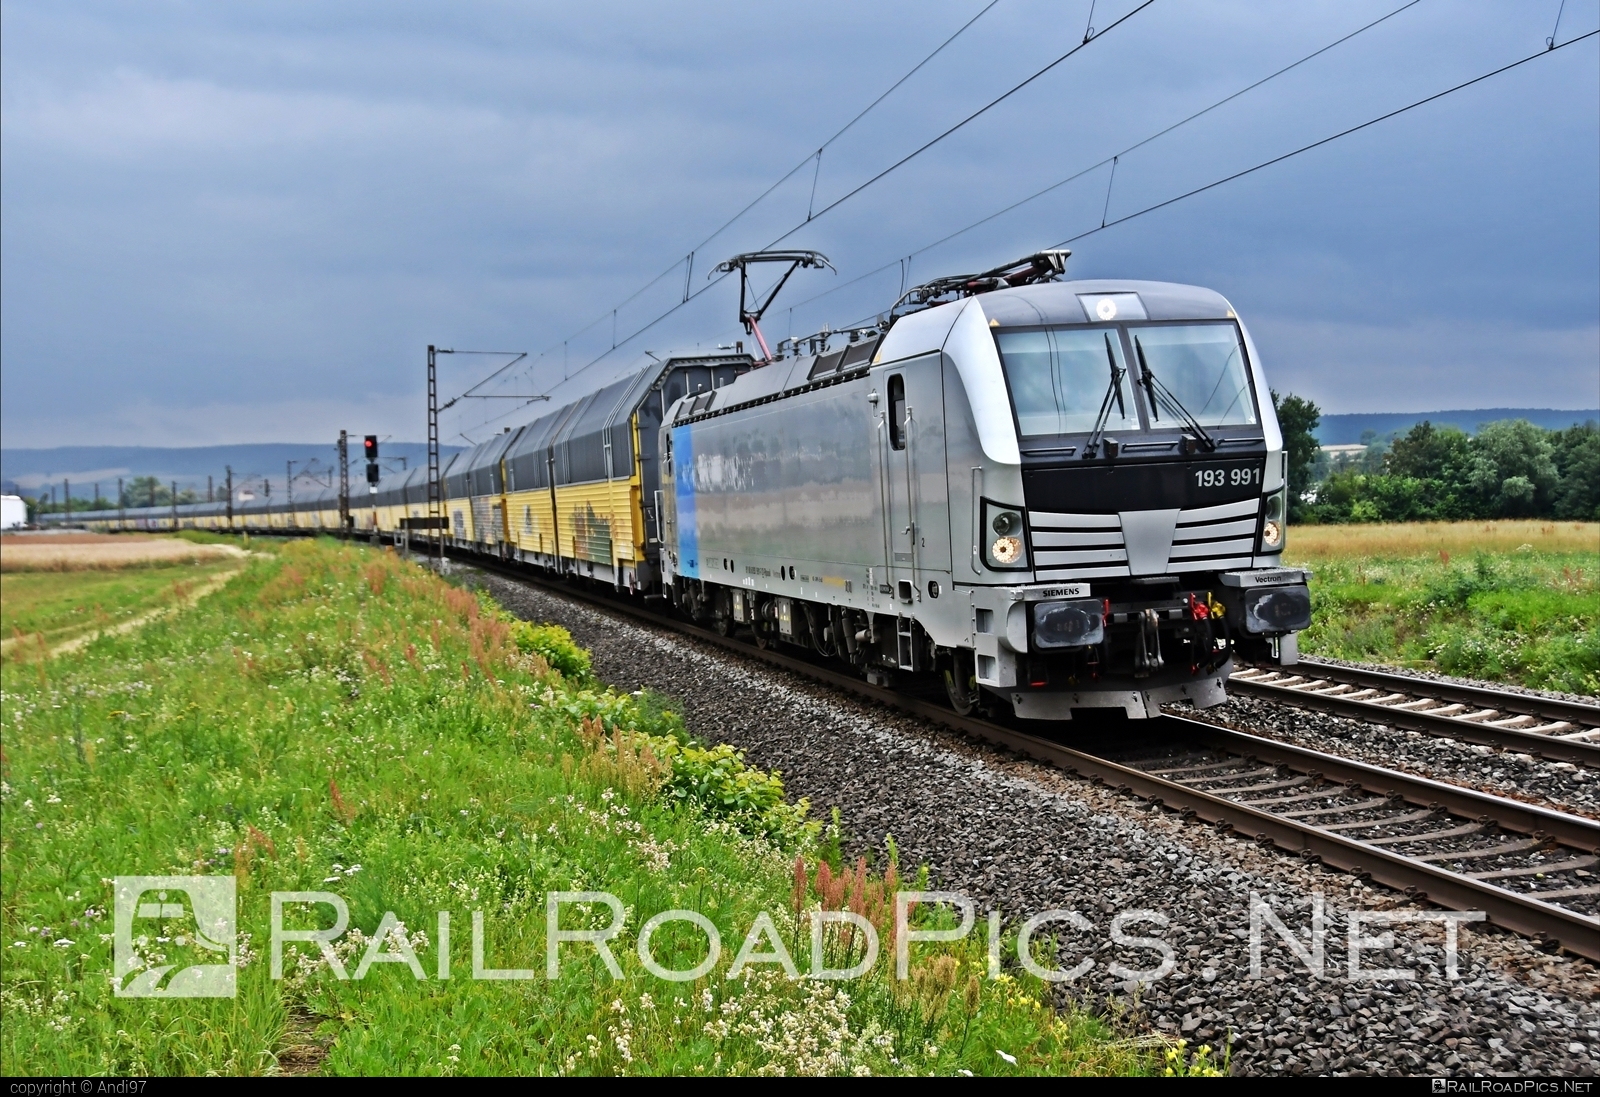 Siemens Vectron AC - 193 991 operated by TXLogistik #railpool #railpoolgmbh #siemens #siemensVectron #siemensVectronAC #txlogistik #vectron #vectronAC